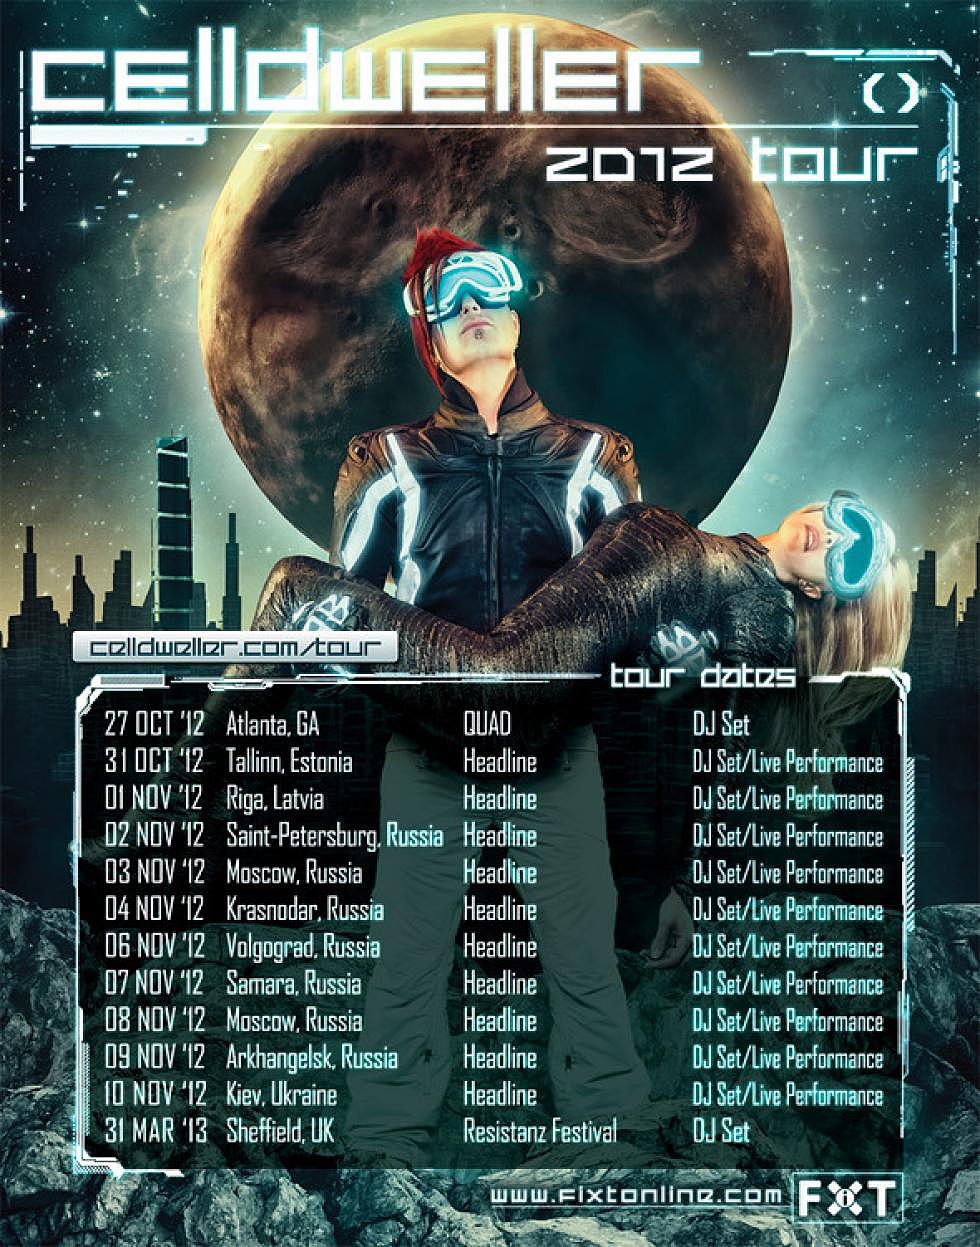 Celldweller Tour &#038; Pay-What-You-Want Charity Bundle with 65+ Min Concert Download